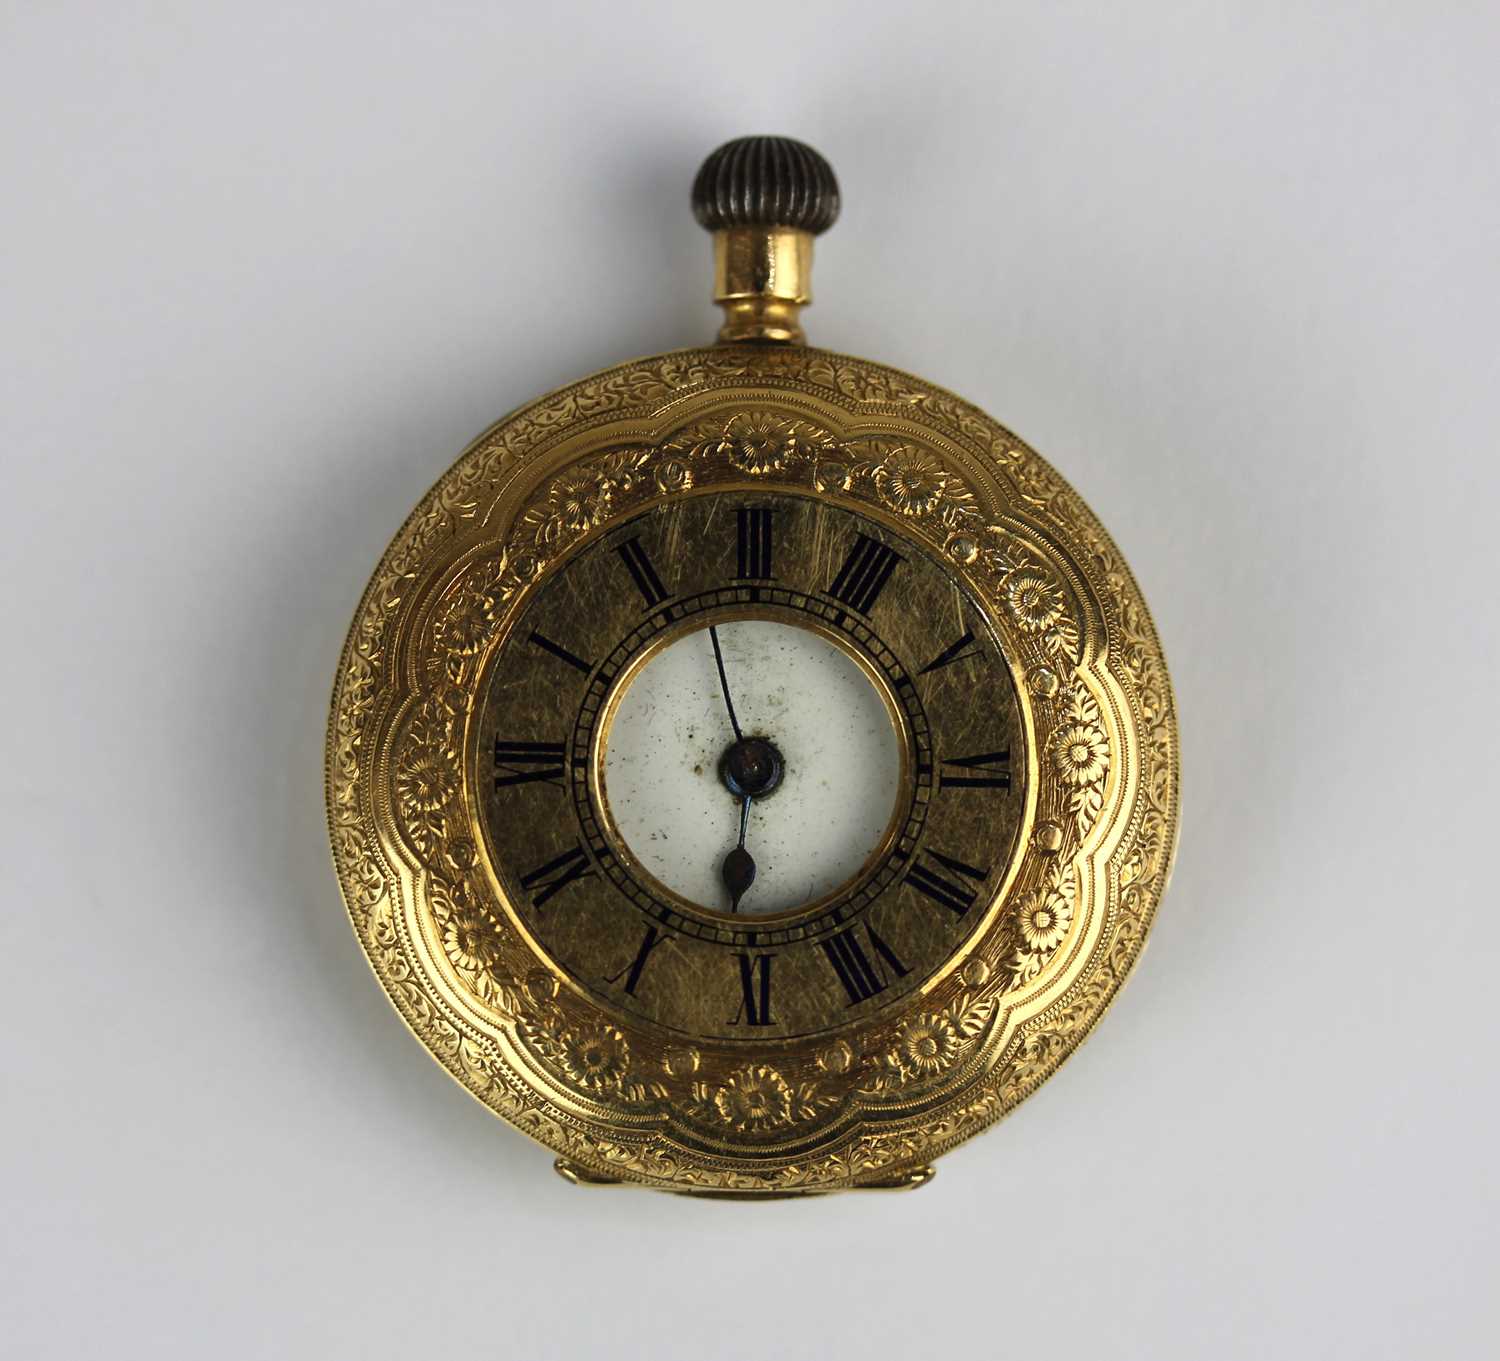 A gold keyless wind half hunt in case lady's fob watch with a base metal inner case, the case